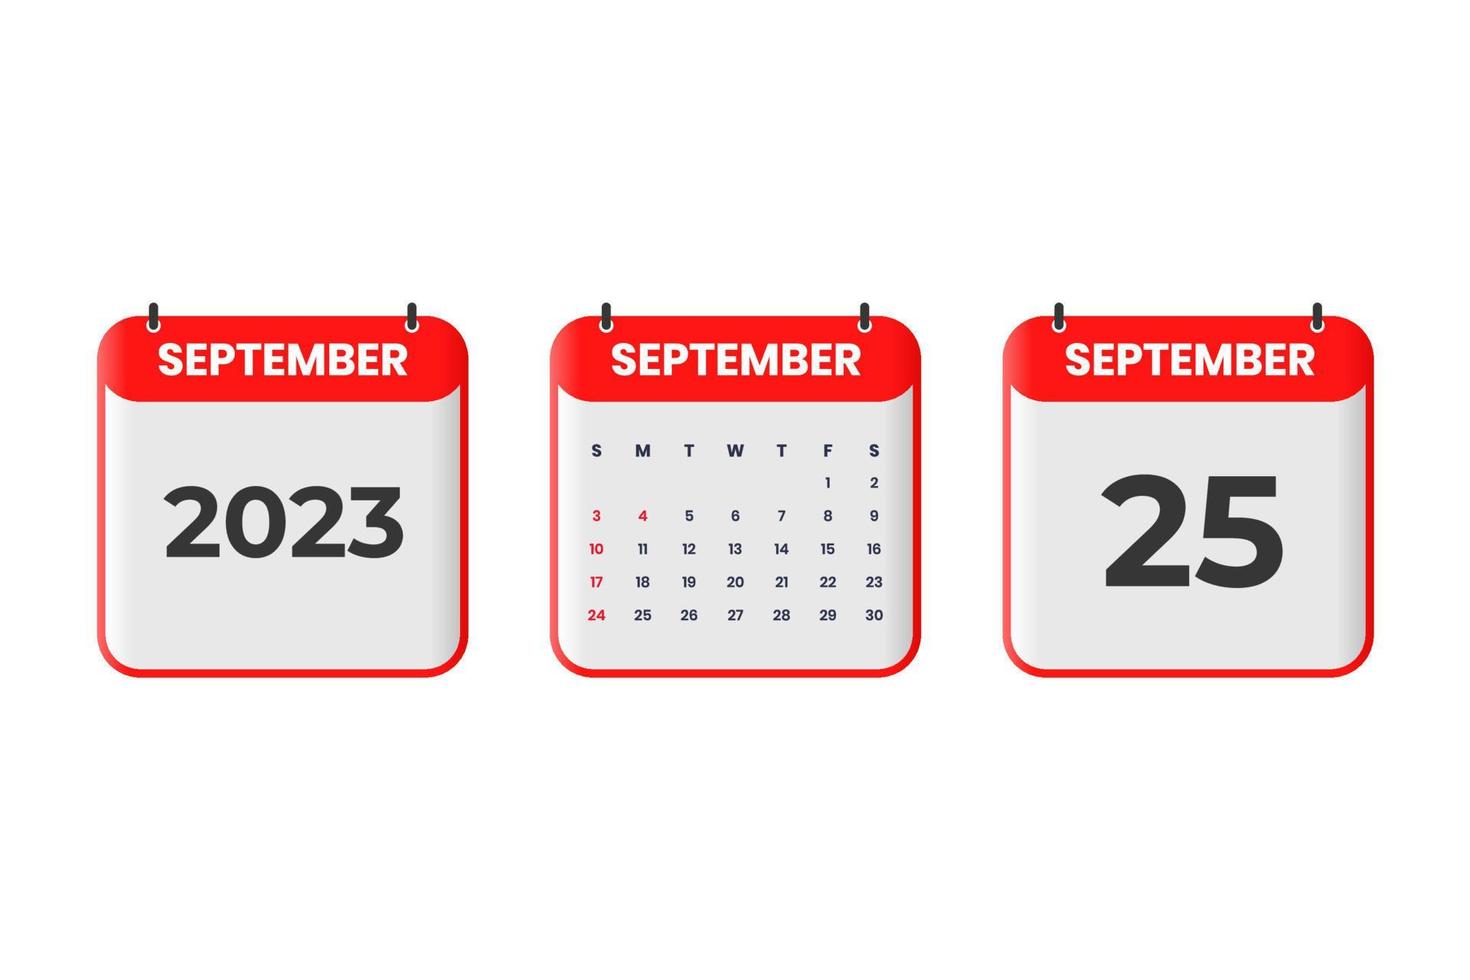 September 2023 calendar design. 25th September 2023 calendar icon for schedule, appointment, important date concept vector